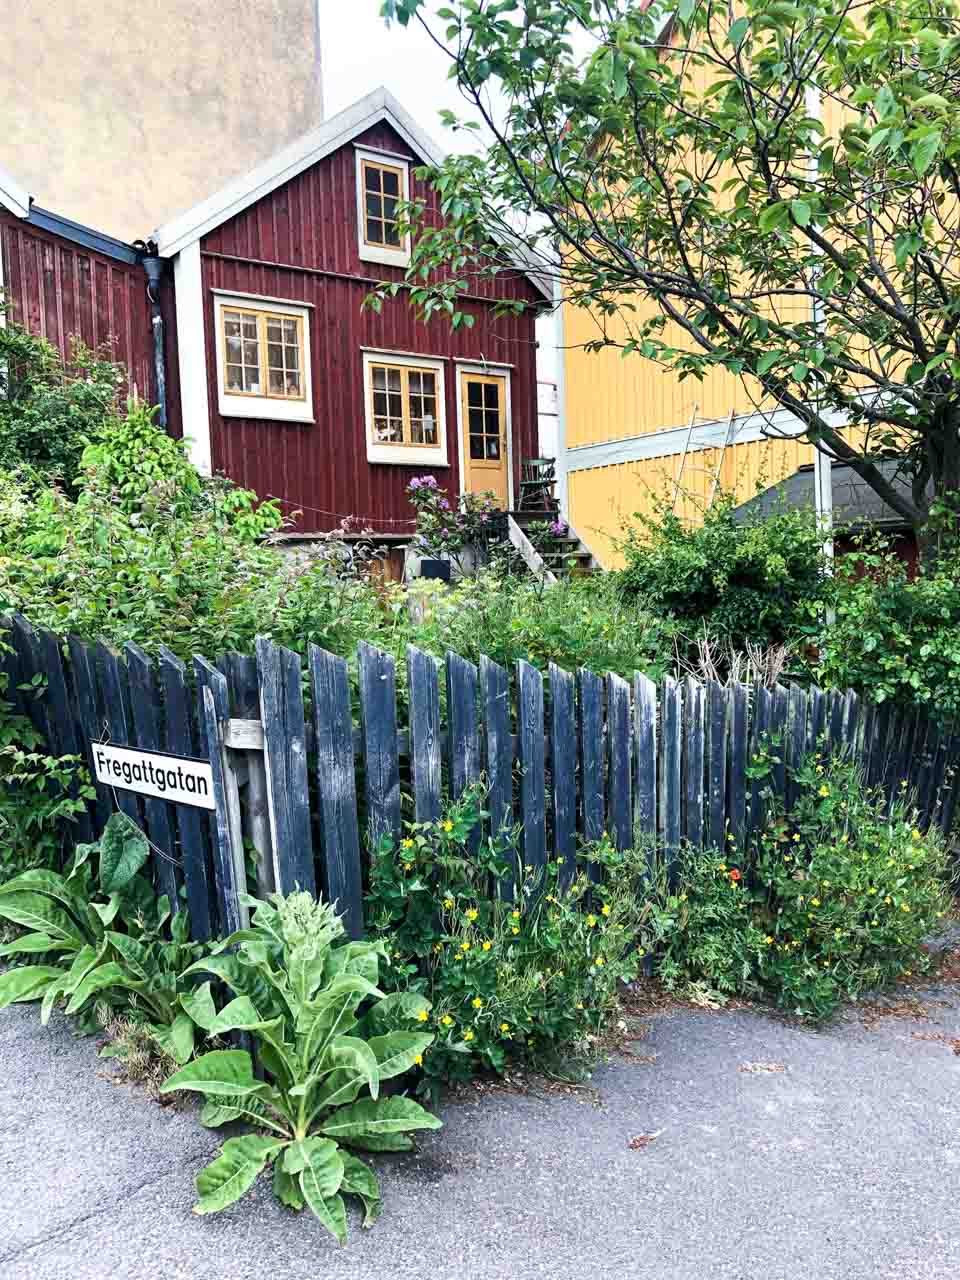 Bushes outside a traditional wooden house in Karlskrona, Sweden